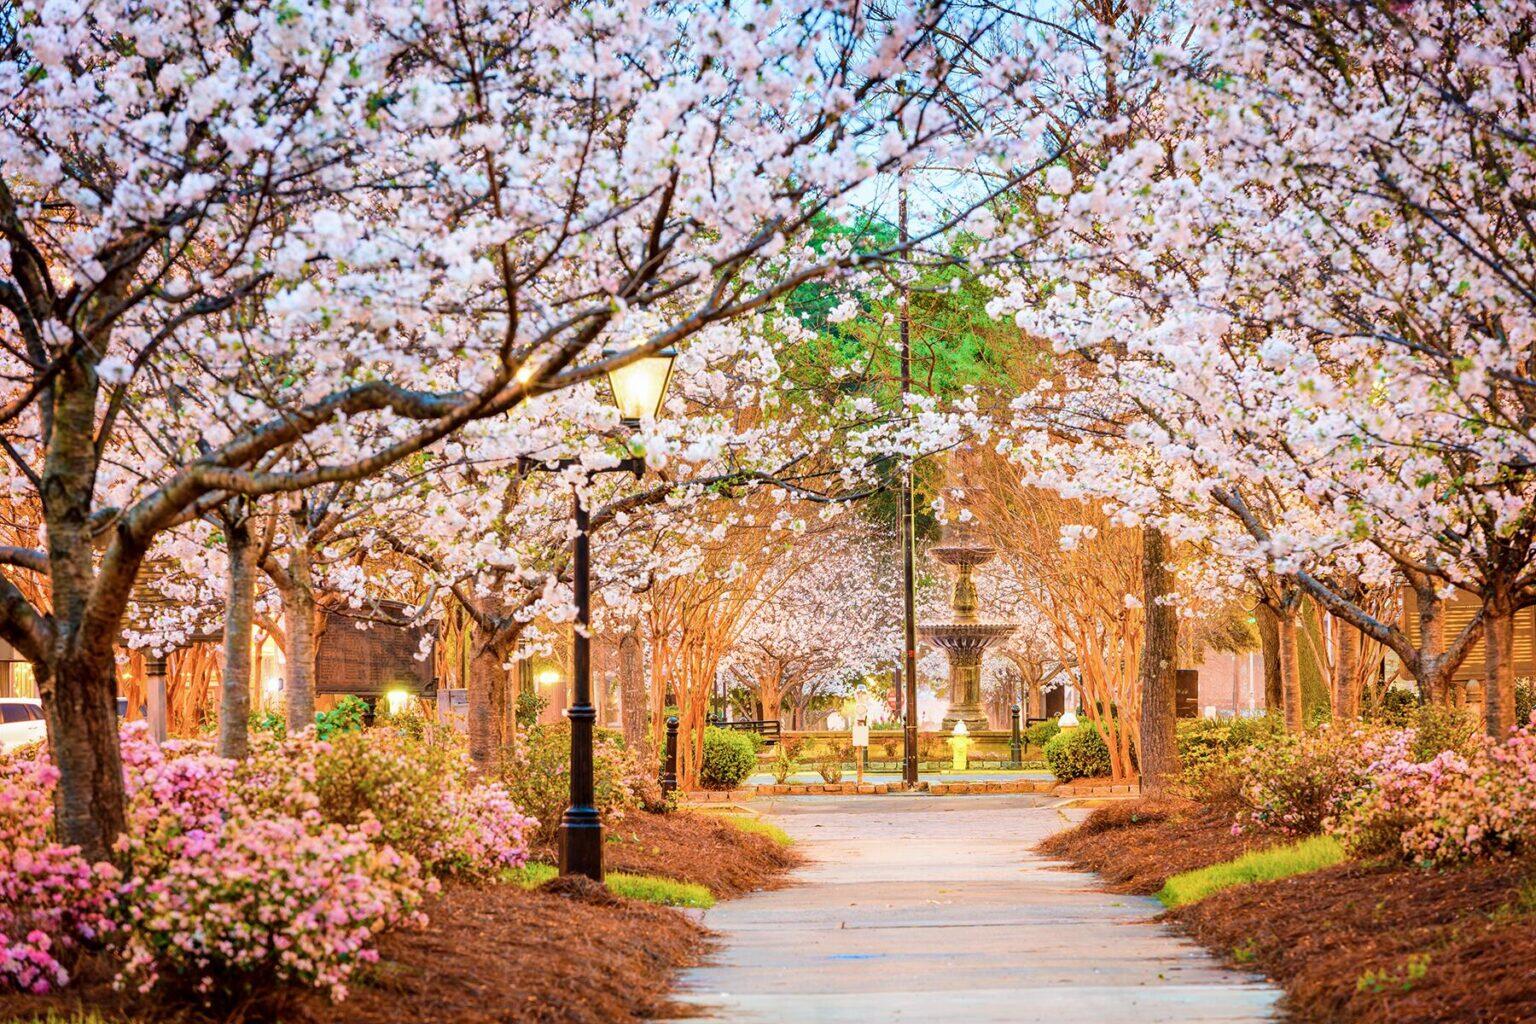 Experience Cherry Blossoms Without the Crowds in Macon,